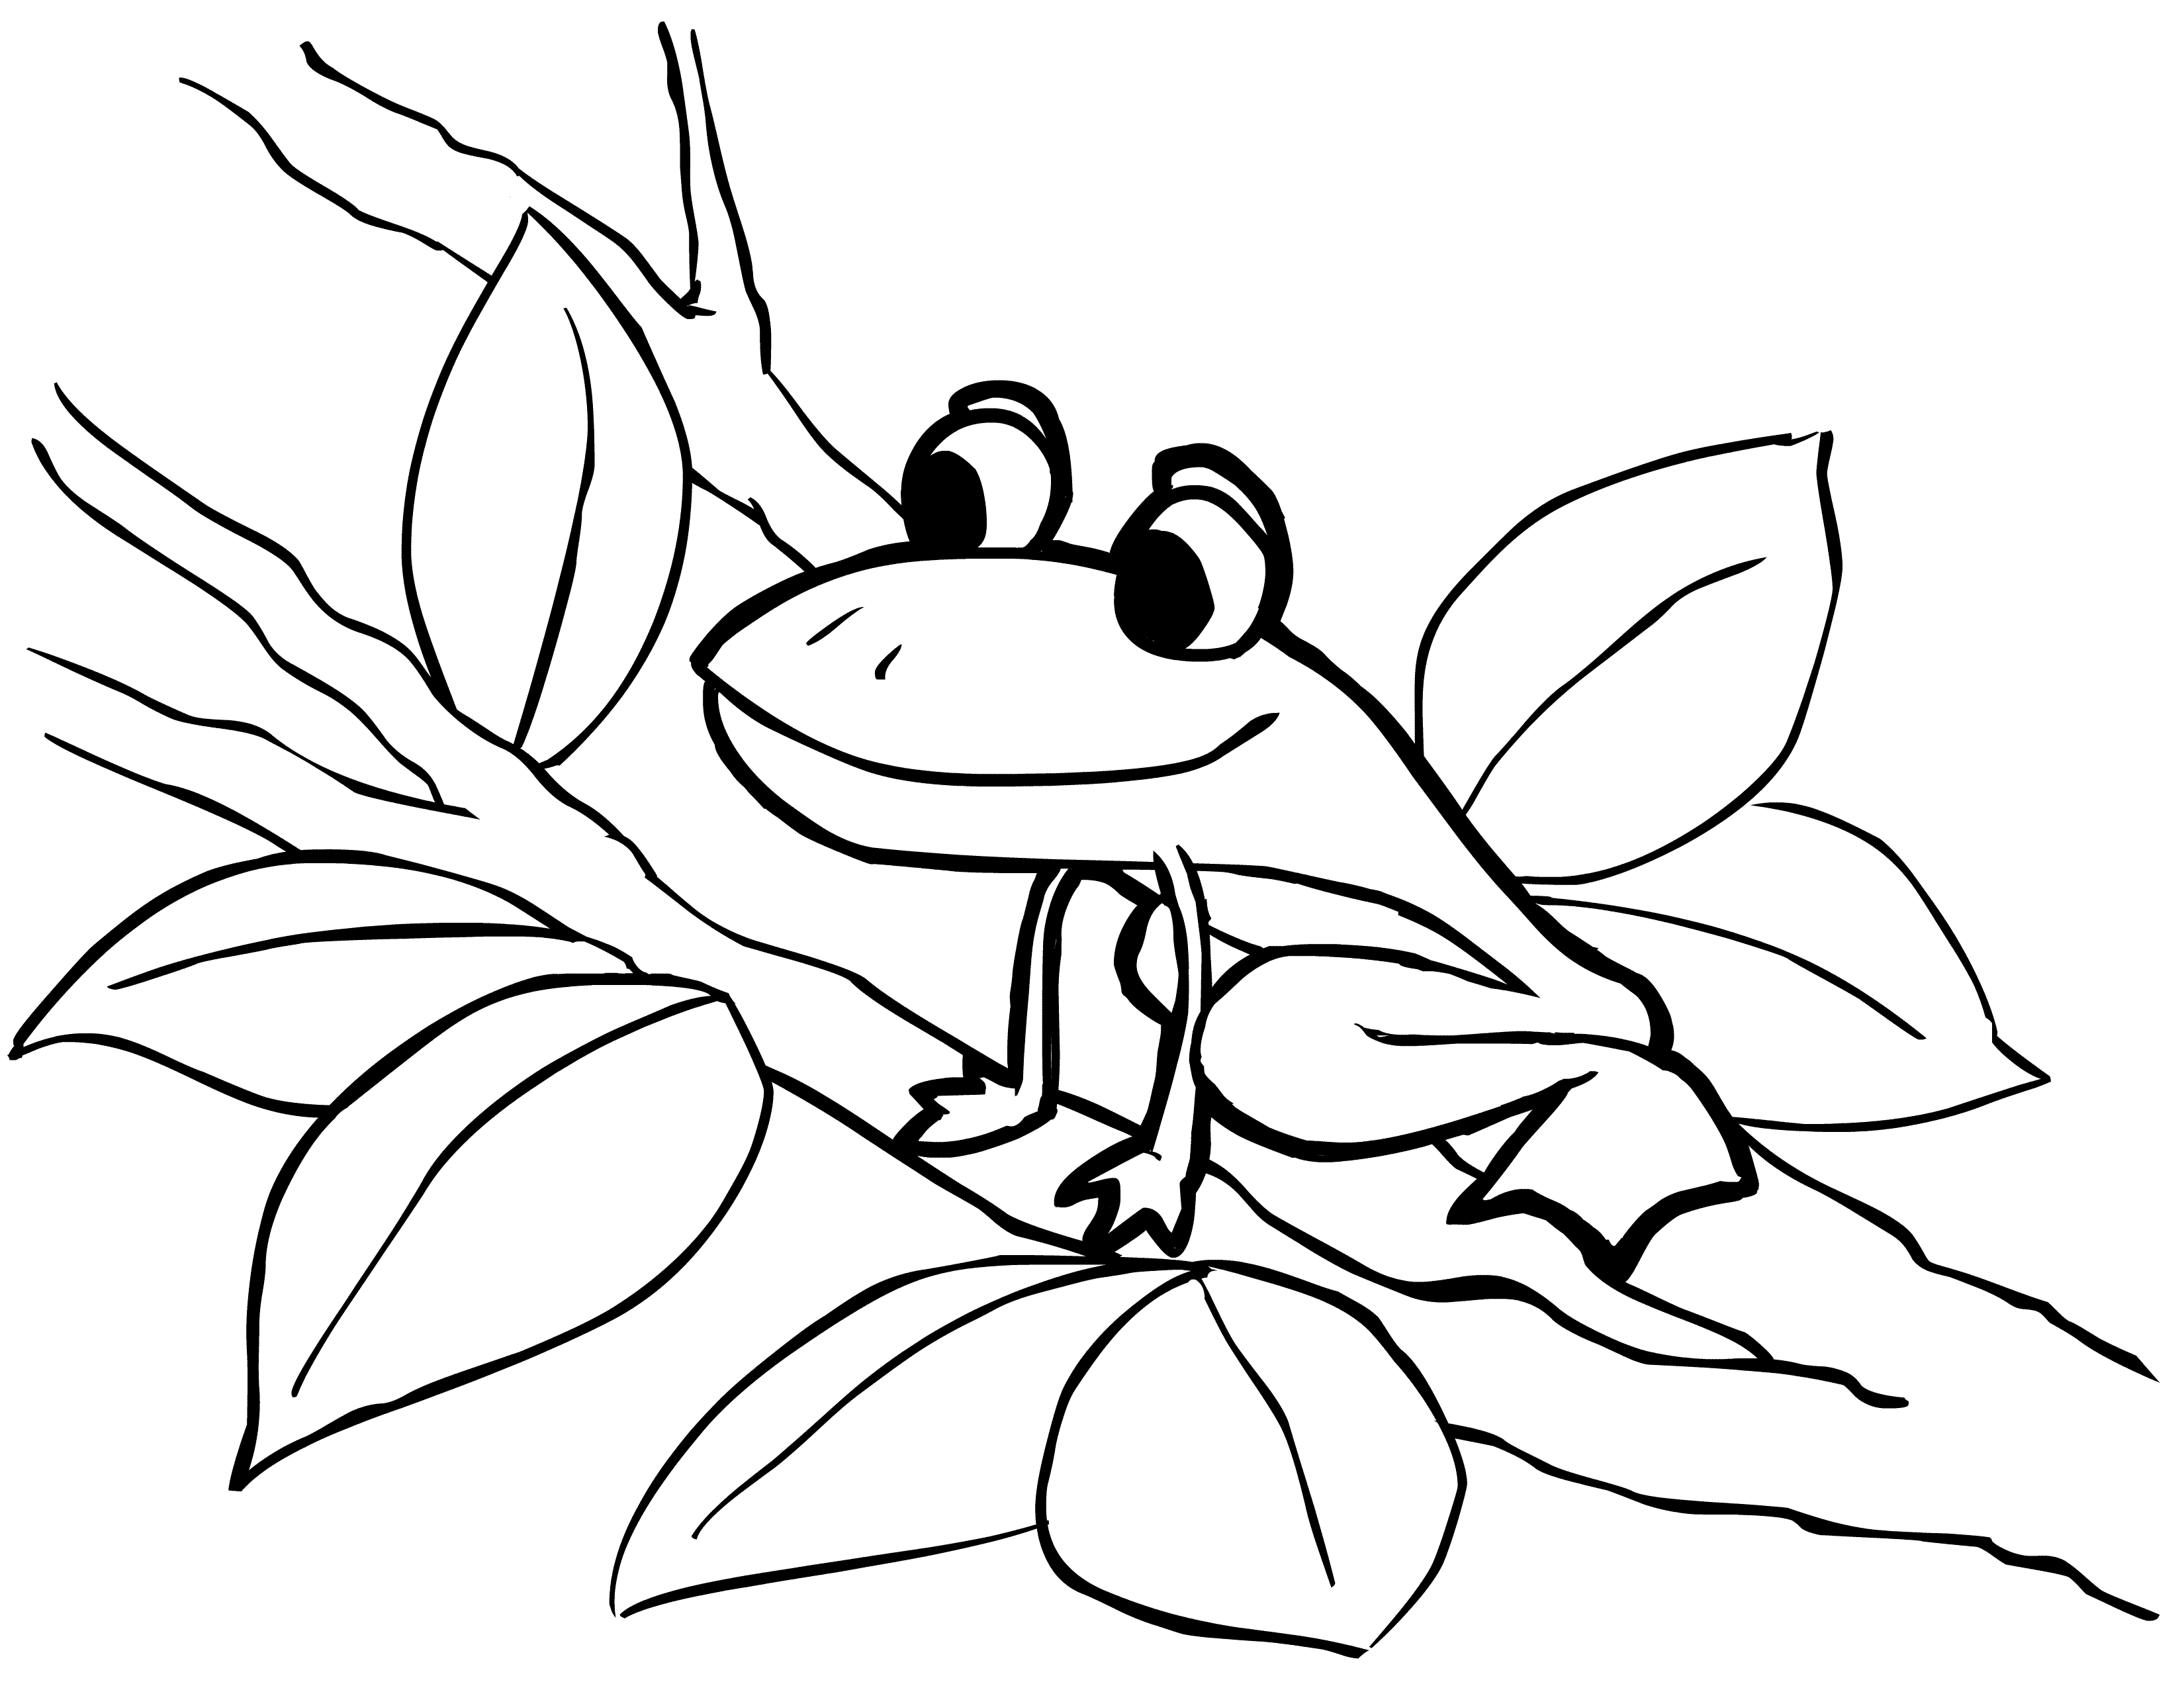 frogs coloring pages frog color page animal coloring pages color plate frogs pages coloring 